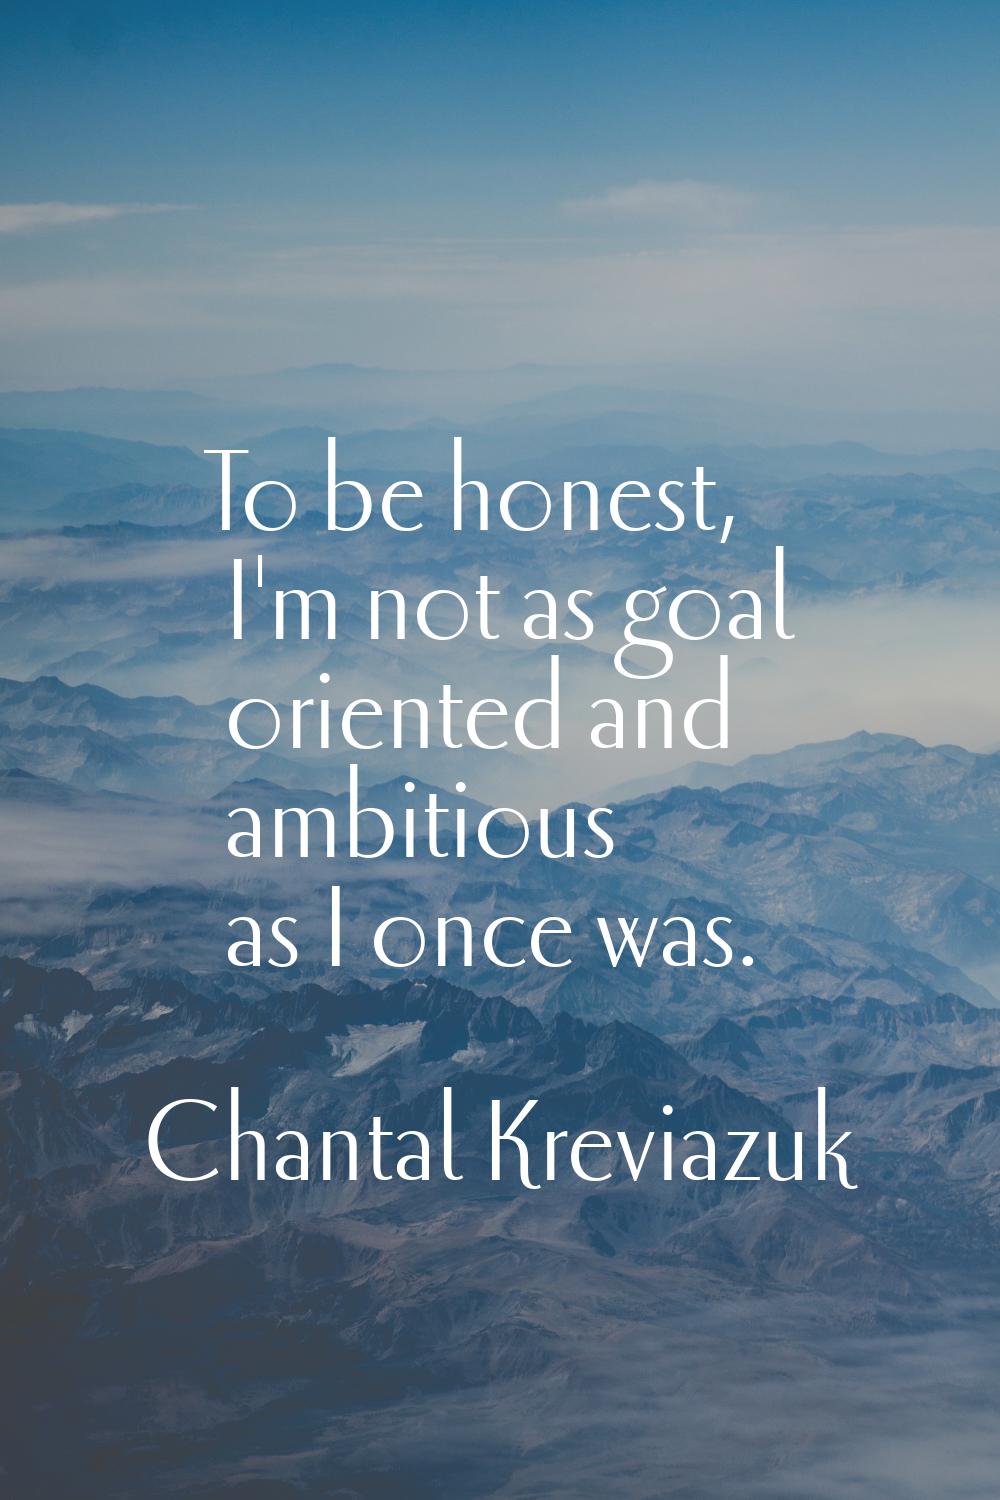 To be honest, I'm not as goal oriented and ambitious as I once was.